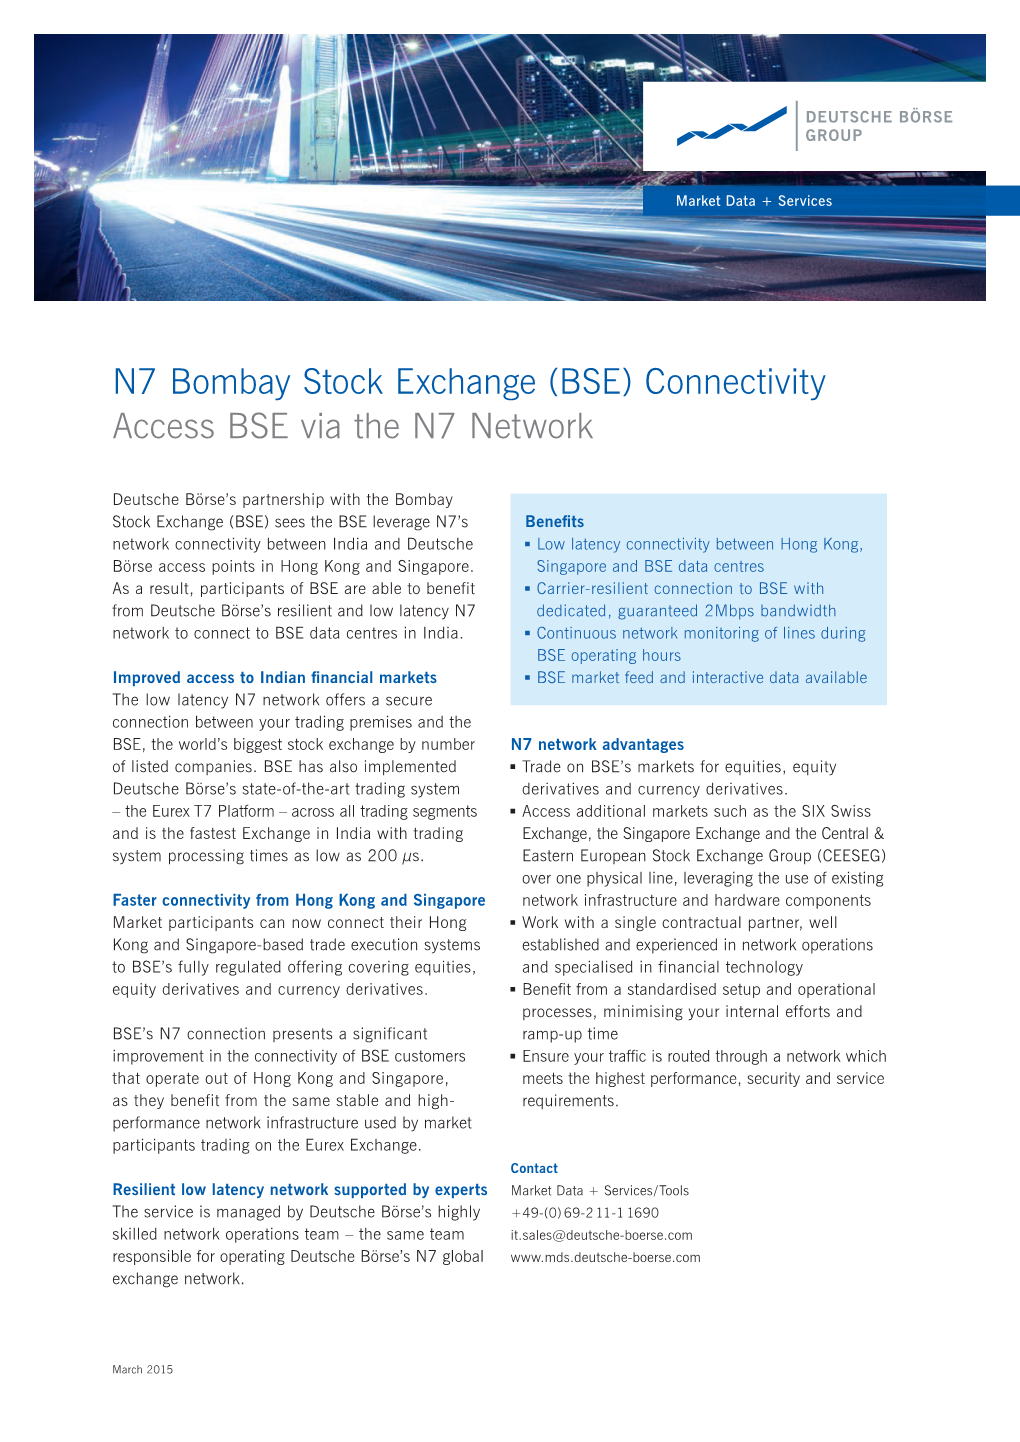 N7 Bombay Stock Exchange (BSE) Connectivity Access BSE Via the N7 Network